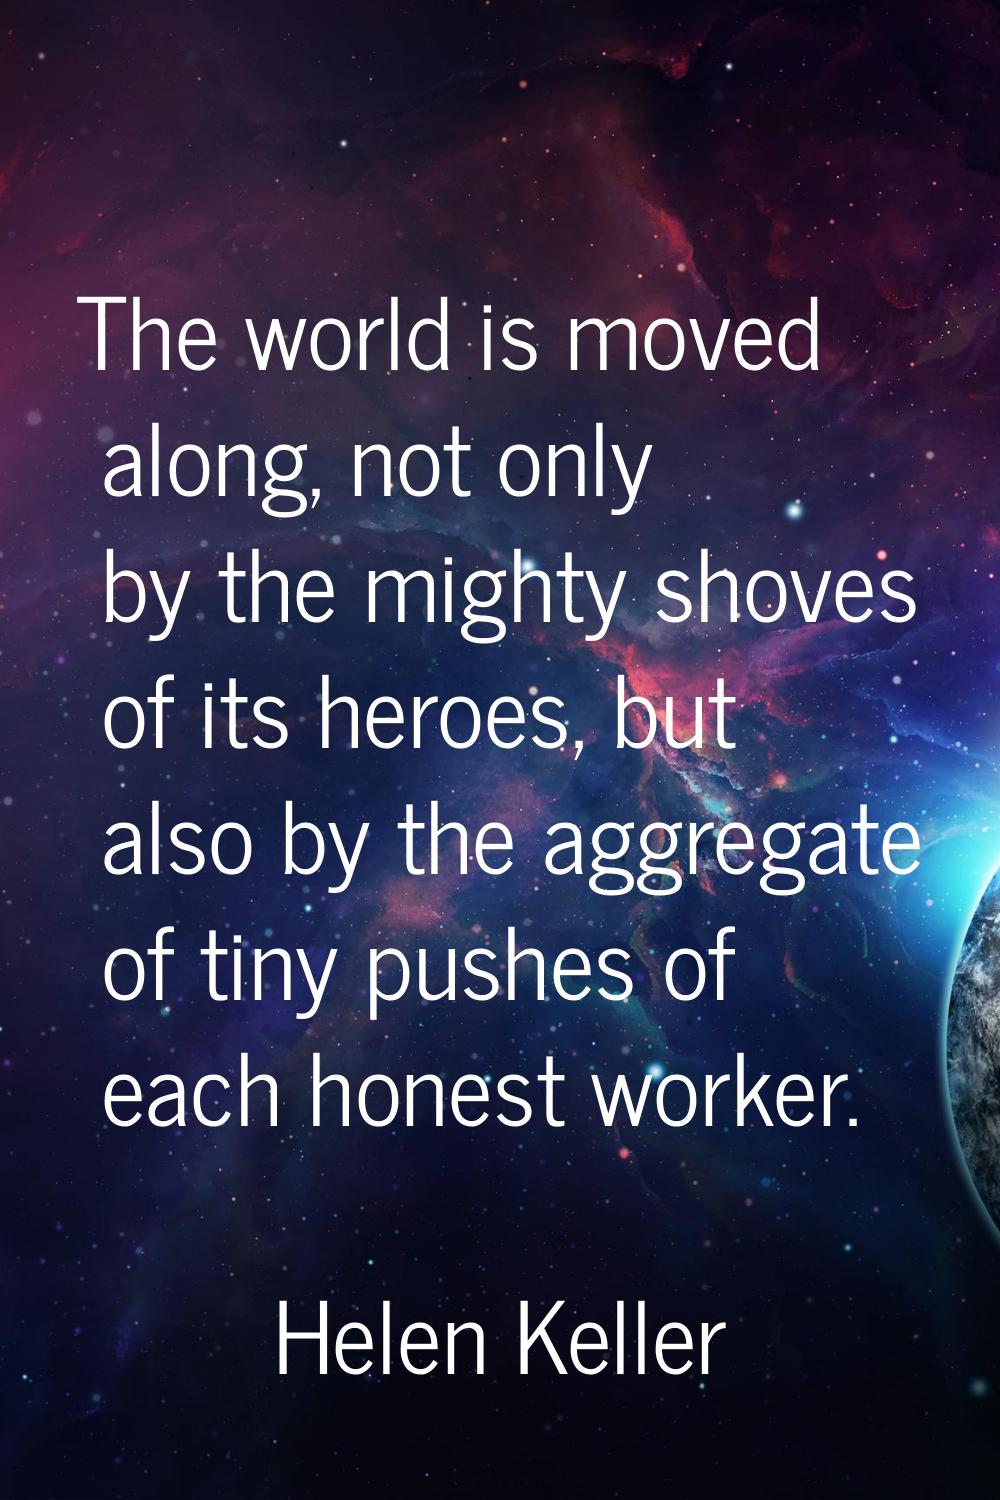 The world is moved along, not only by the mighty shoves of its heroes, but also by the aggregate of